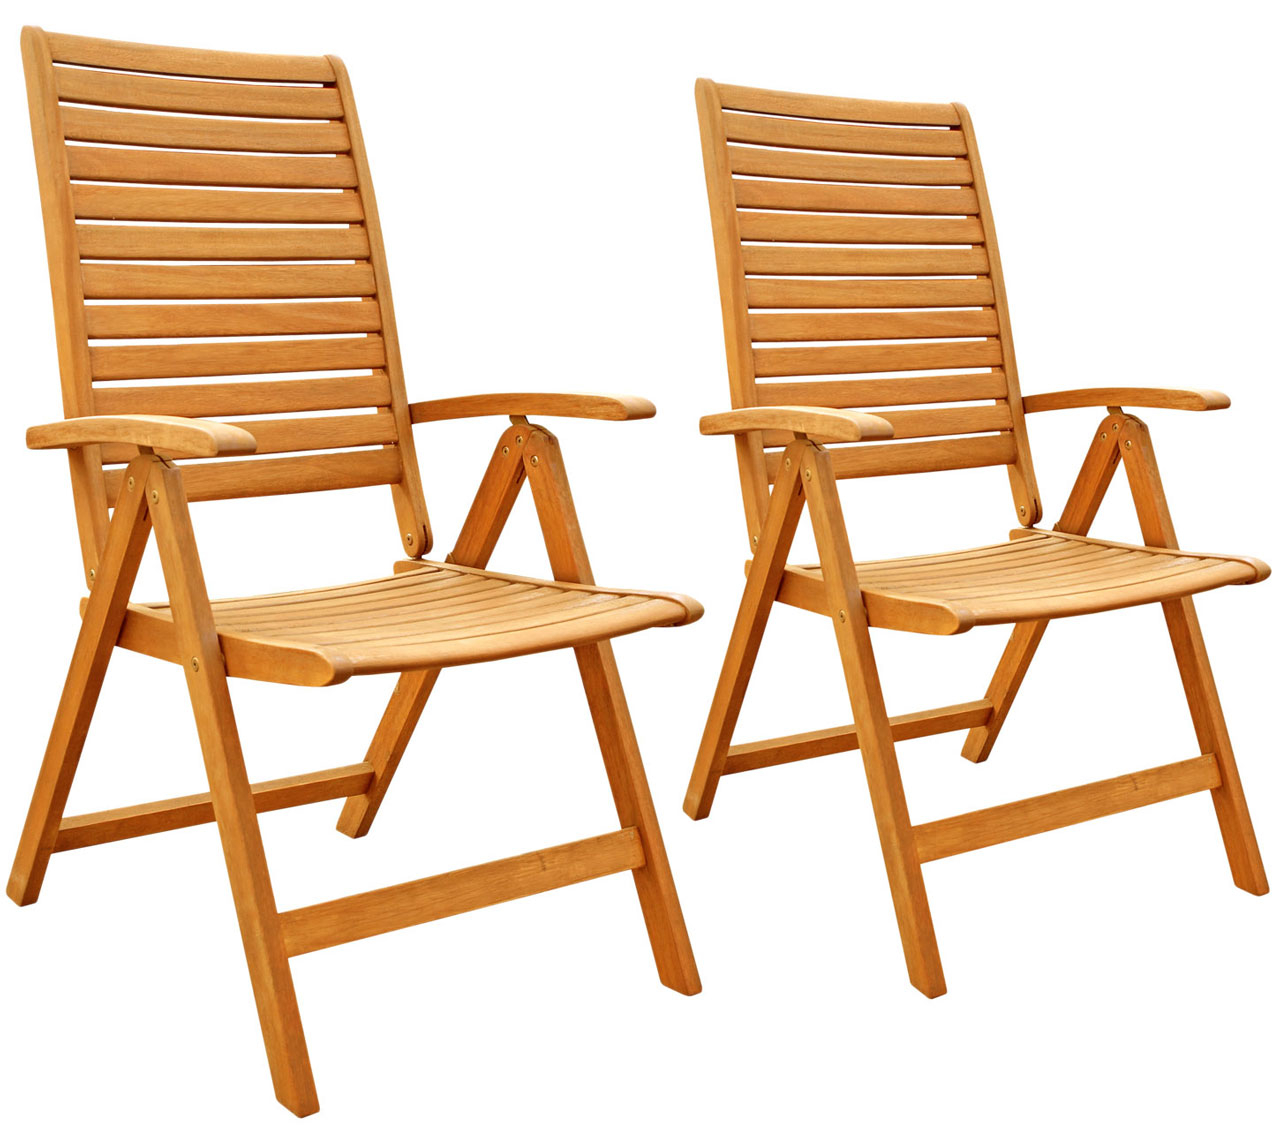 Wooden garden chairs with arms